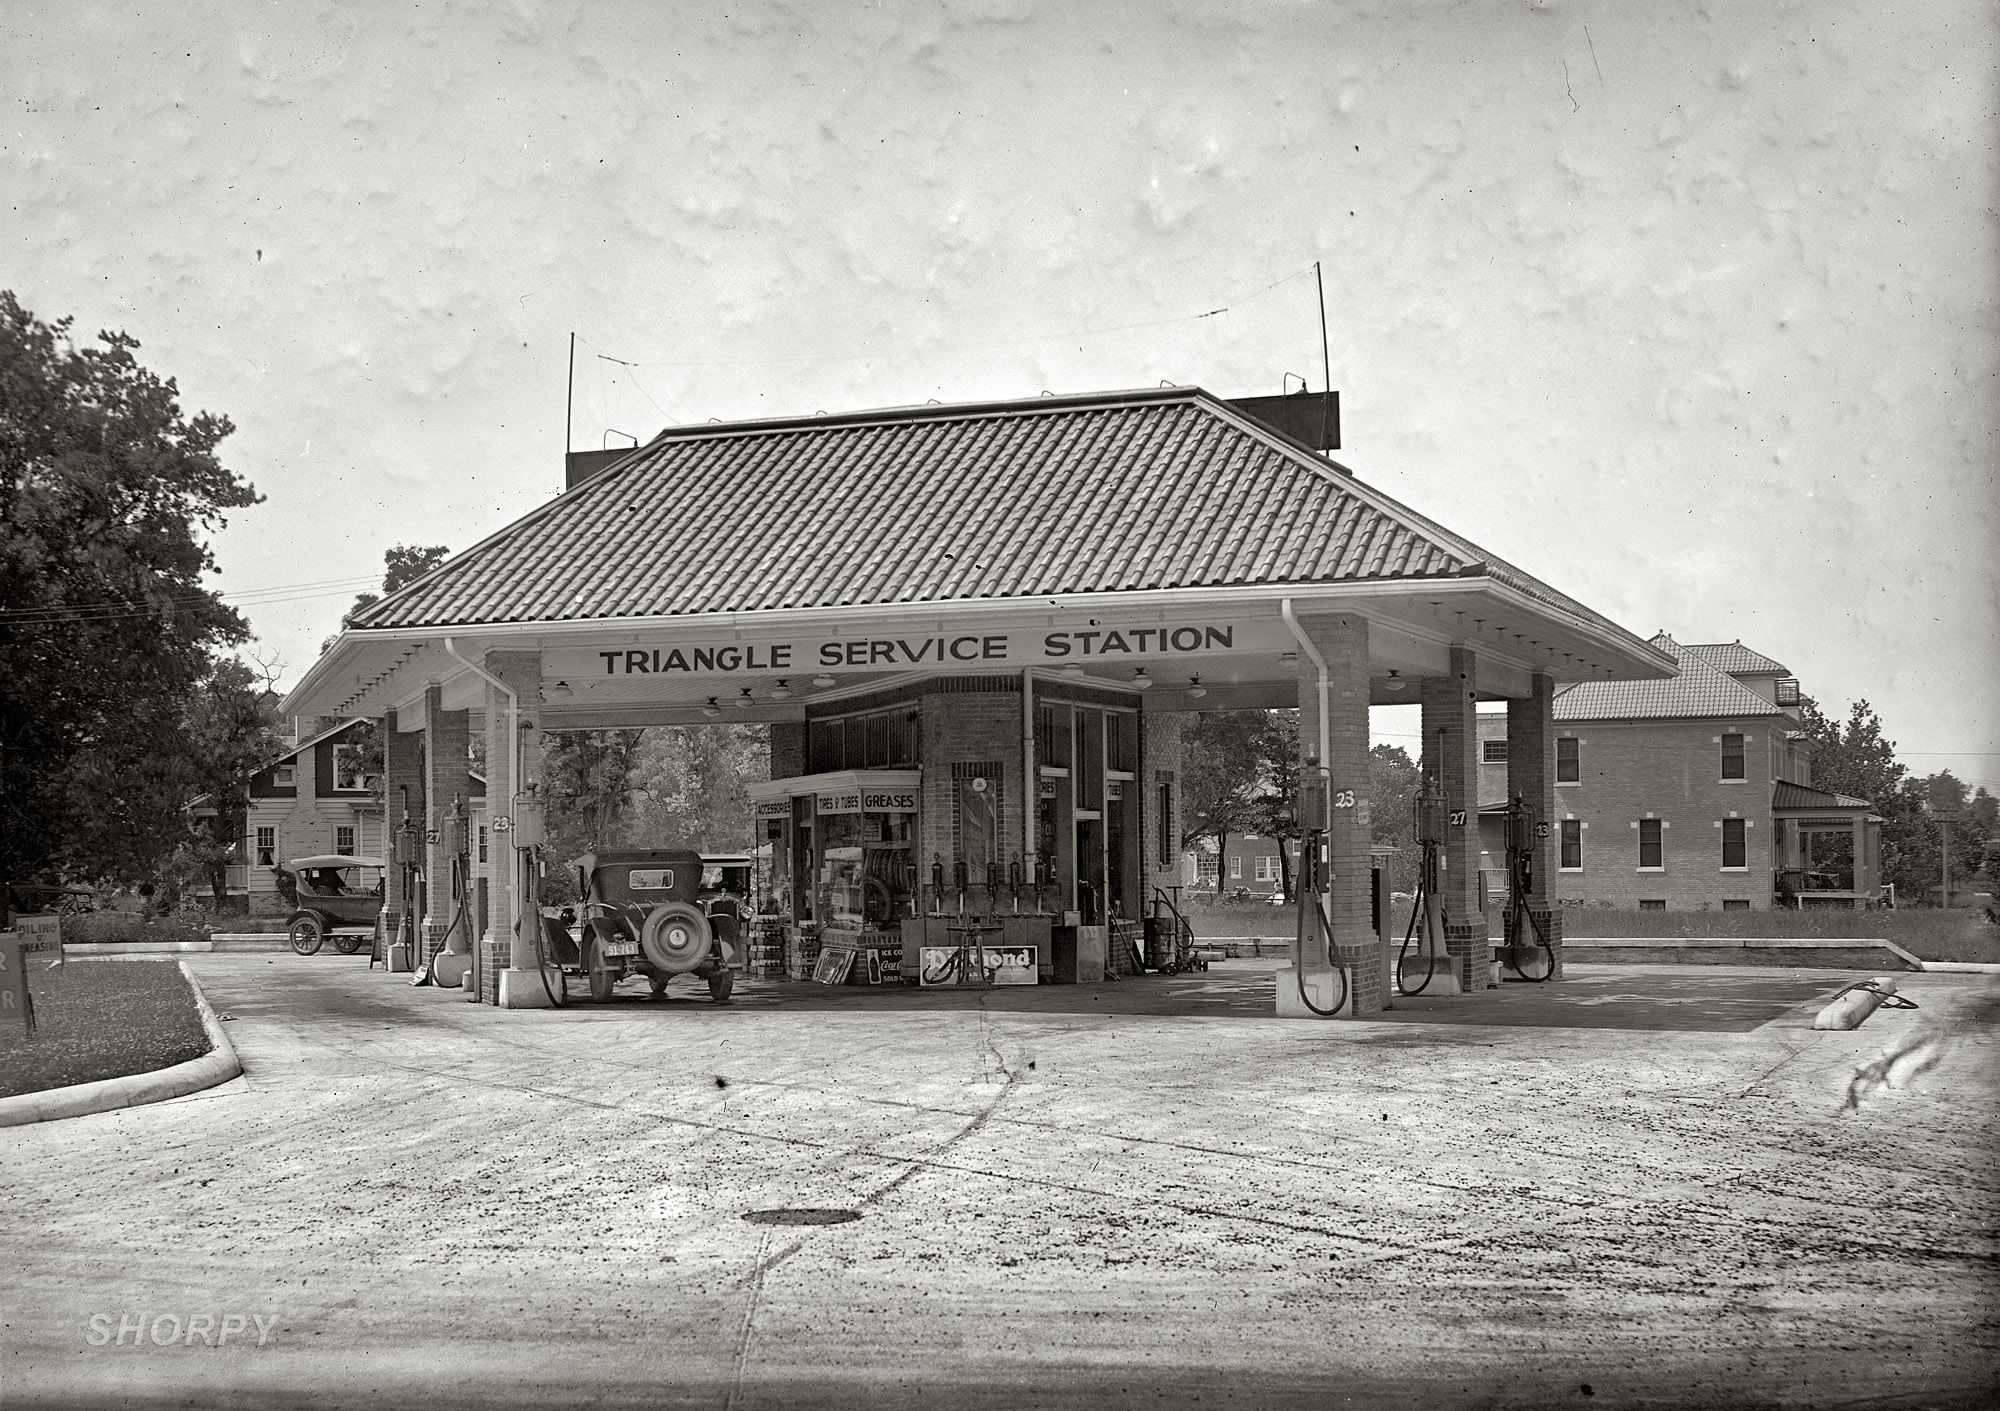 1925. The Triangle Service Station in Arlington, Virginia, at Mount Vernon Avenue and Military Road. View full size. National Photo Company Collection.